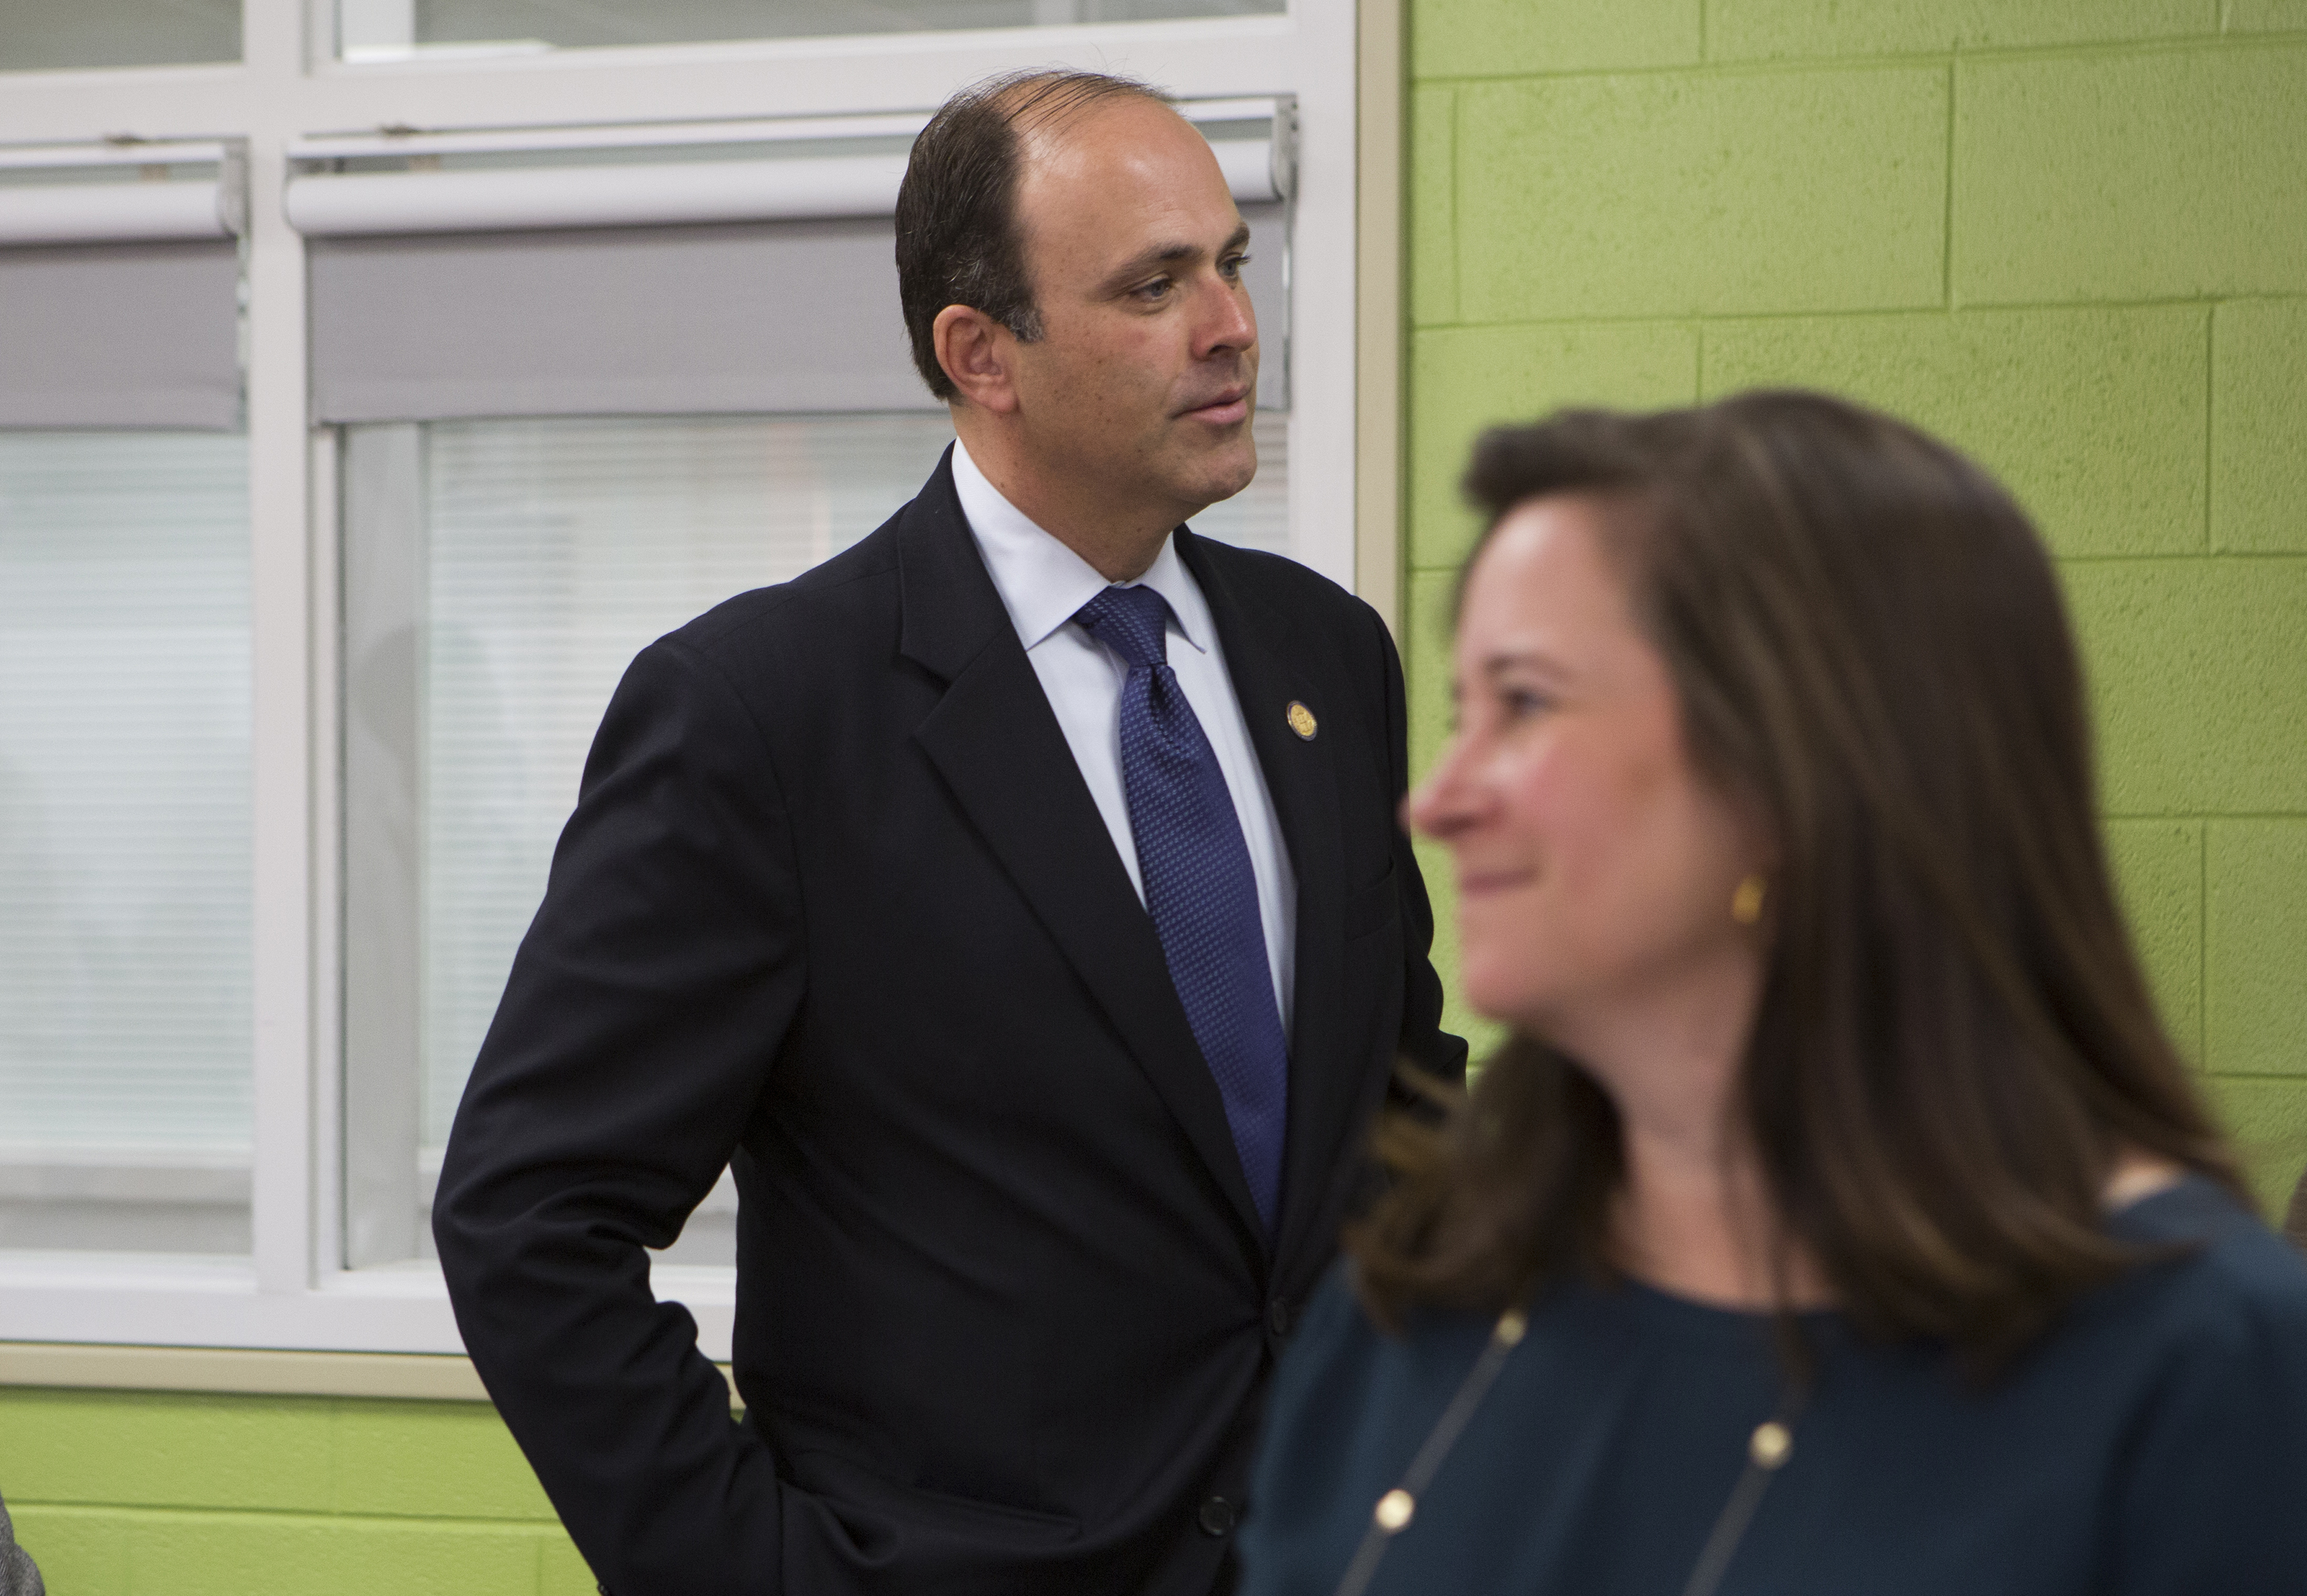 Republican David Yancey and Democrat Shelly Simonds attend a "take your legislator to school day" Tuesday, November 28 at Heritage High School in Newport News, Va. Yancey leads Simonds by ten votes in the 94th District in the Virginia House of Delegates race. (The Washington Post/Getty Images)